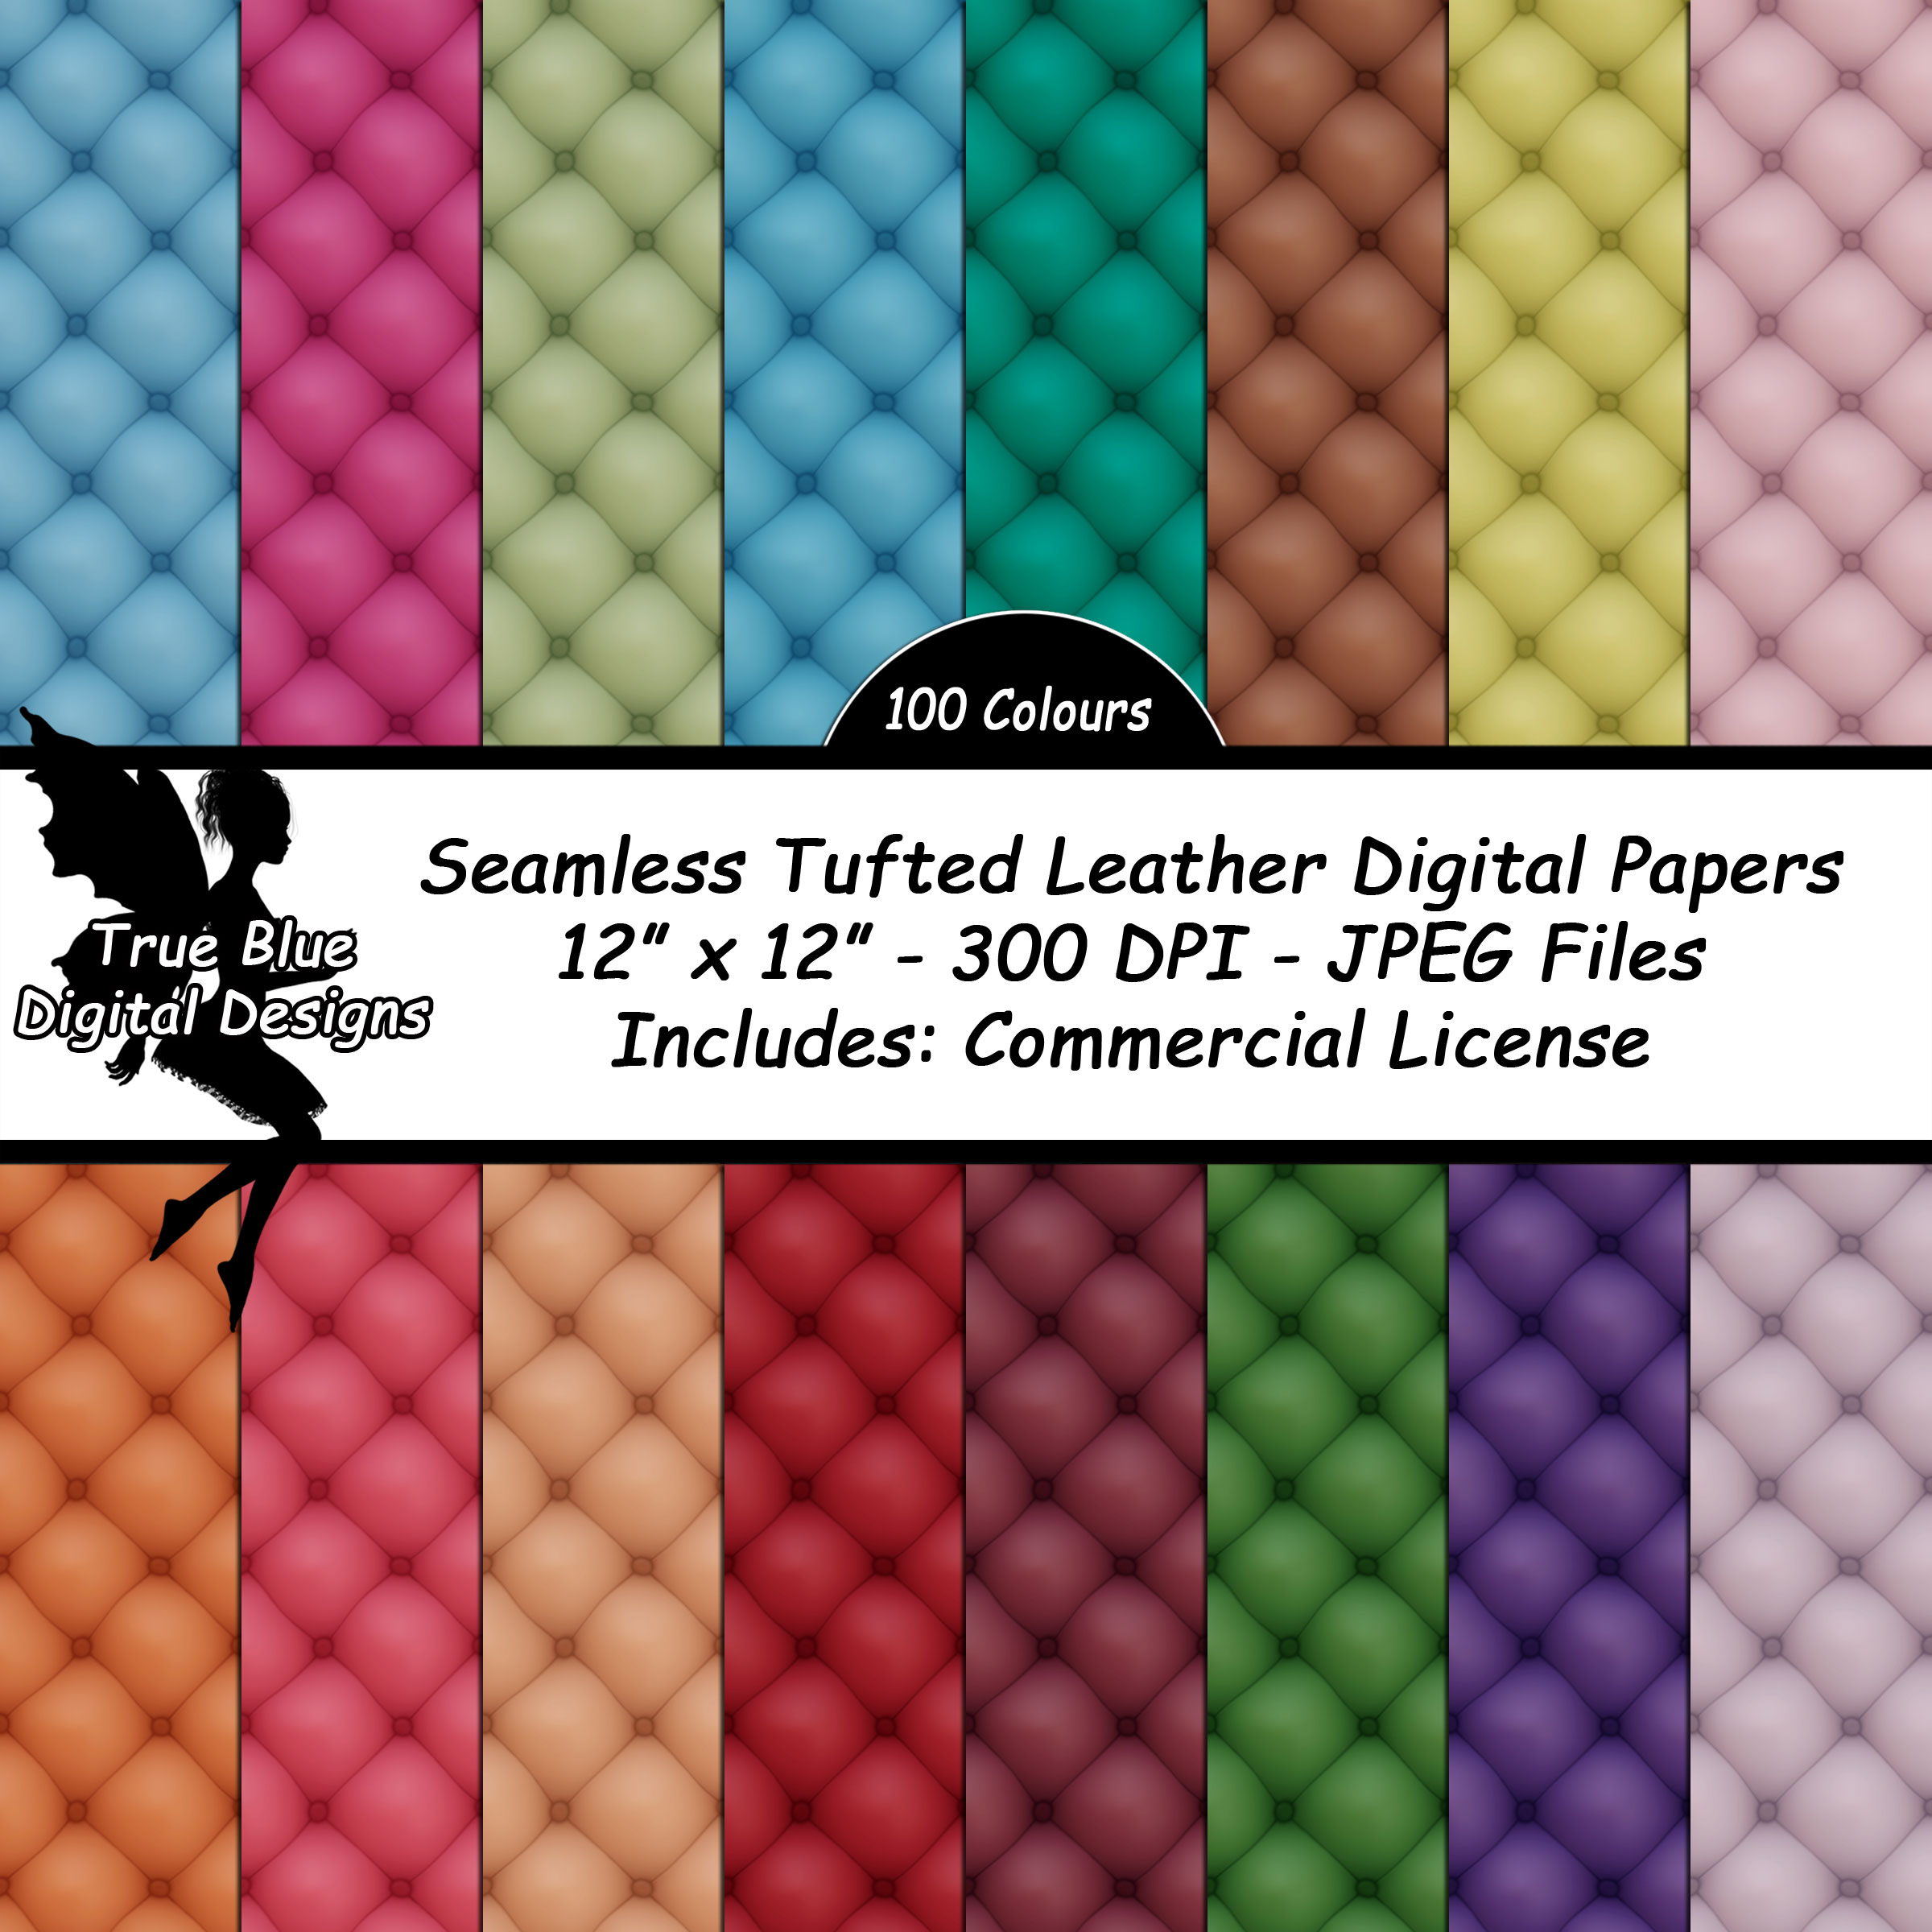 Tufted Leather Digital Paper